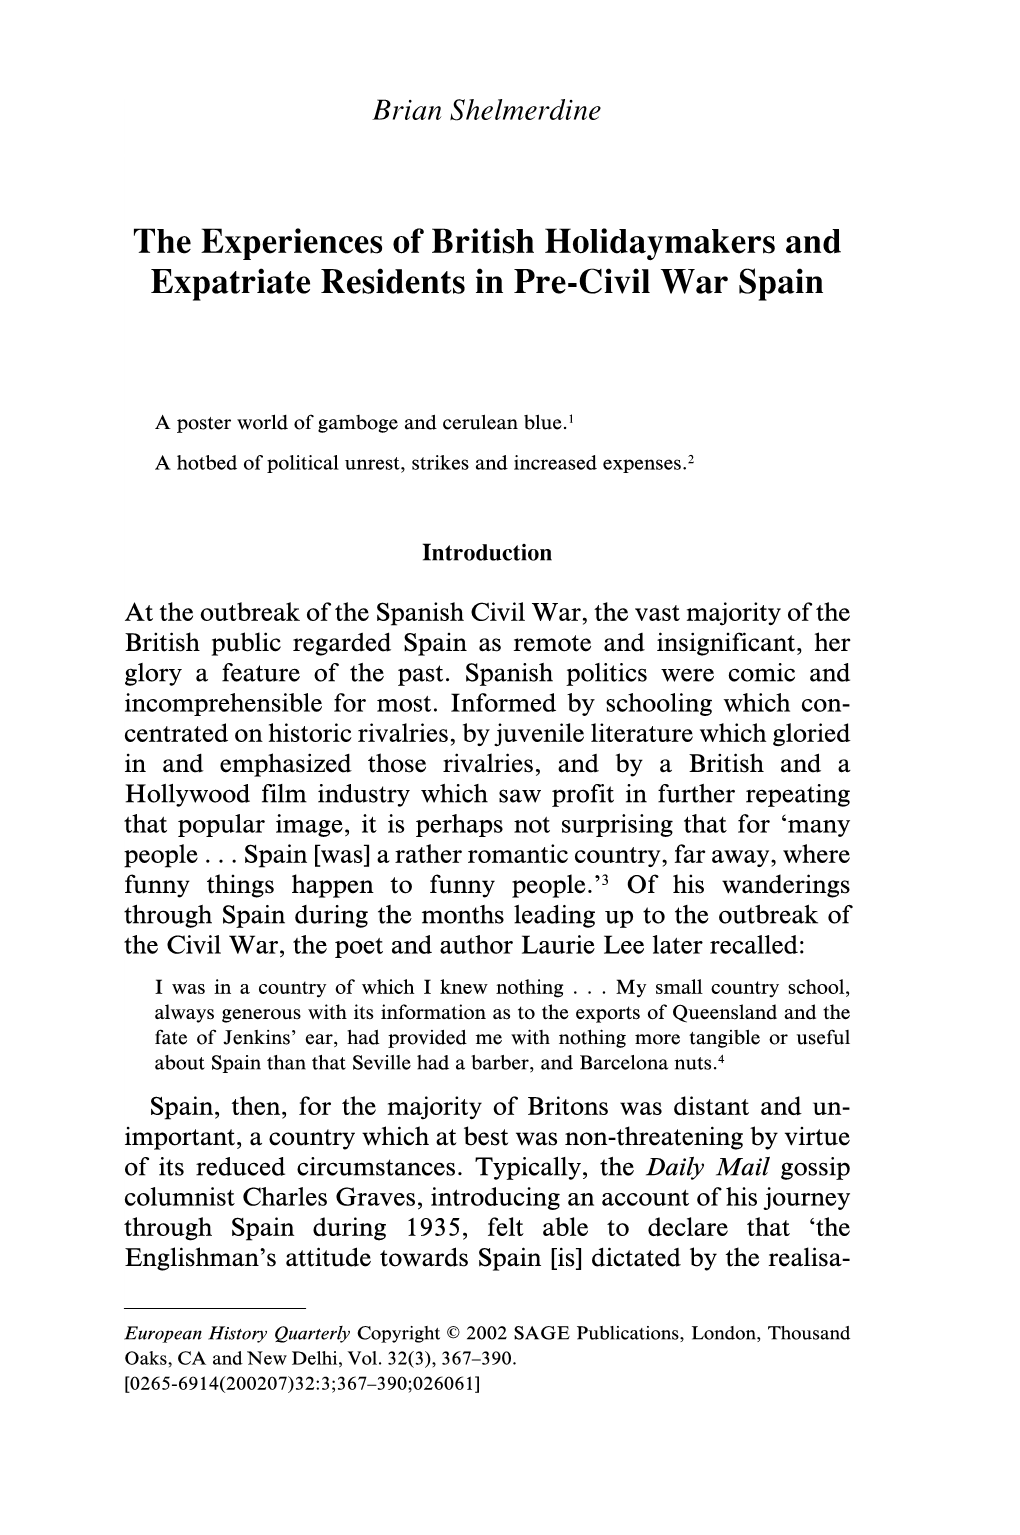 The Experiences of British Holidaymakers and Expatriate Residents in Pre-Civil War Spain